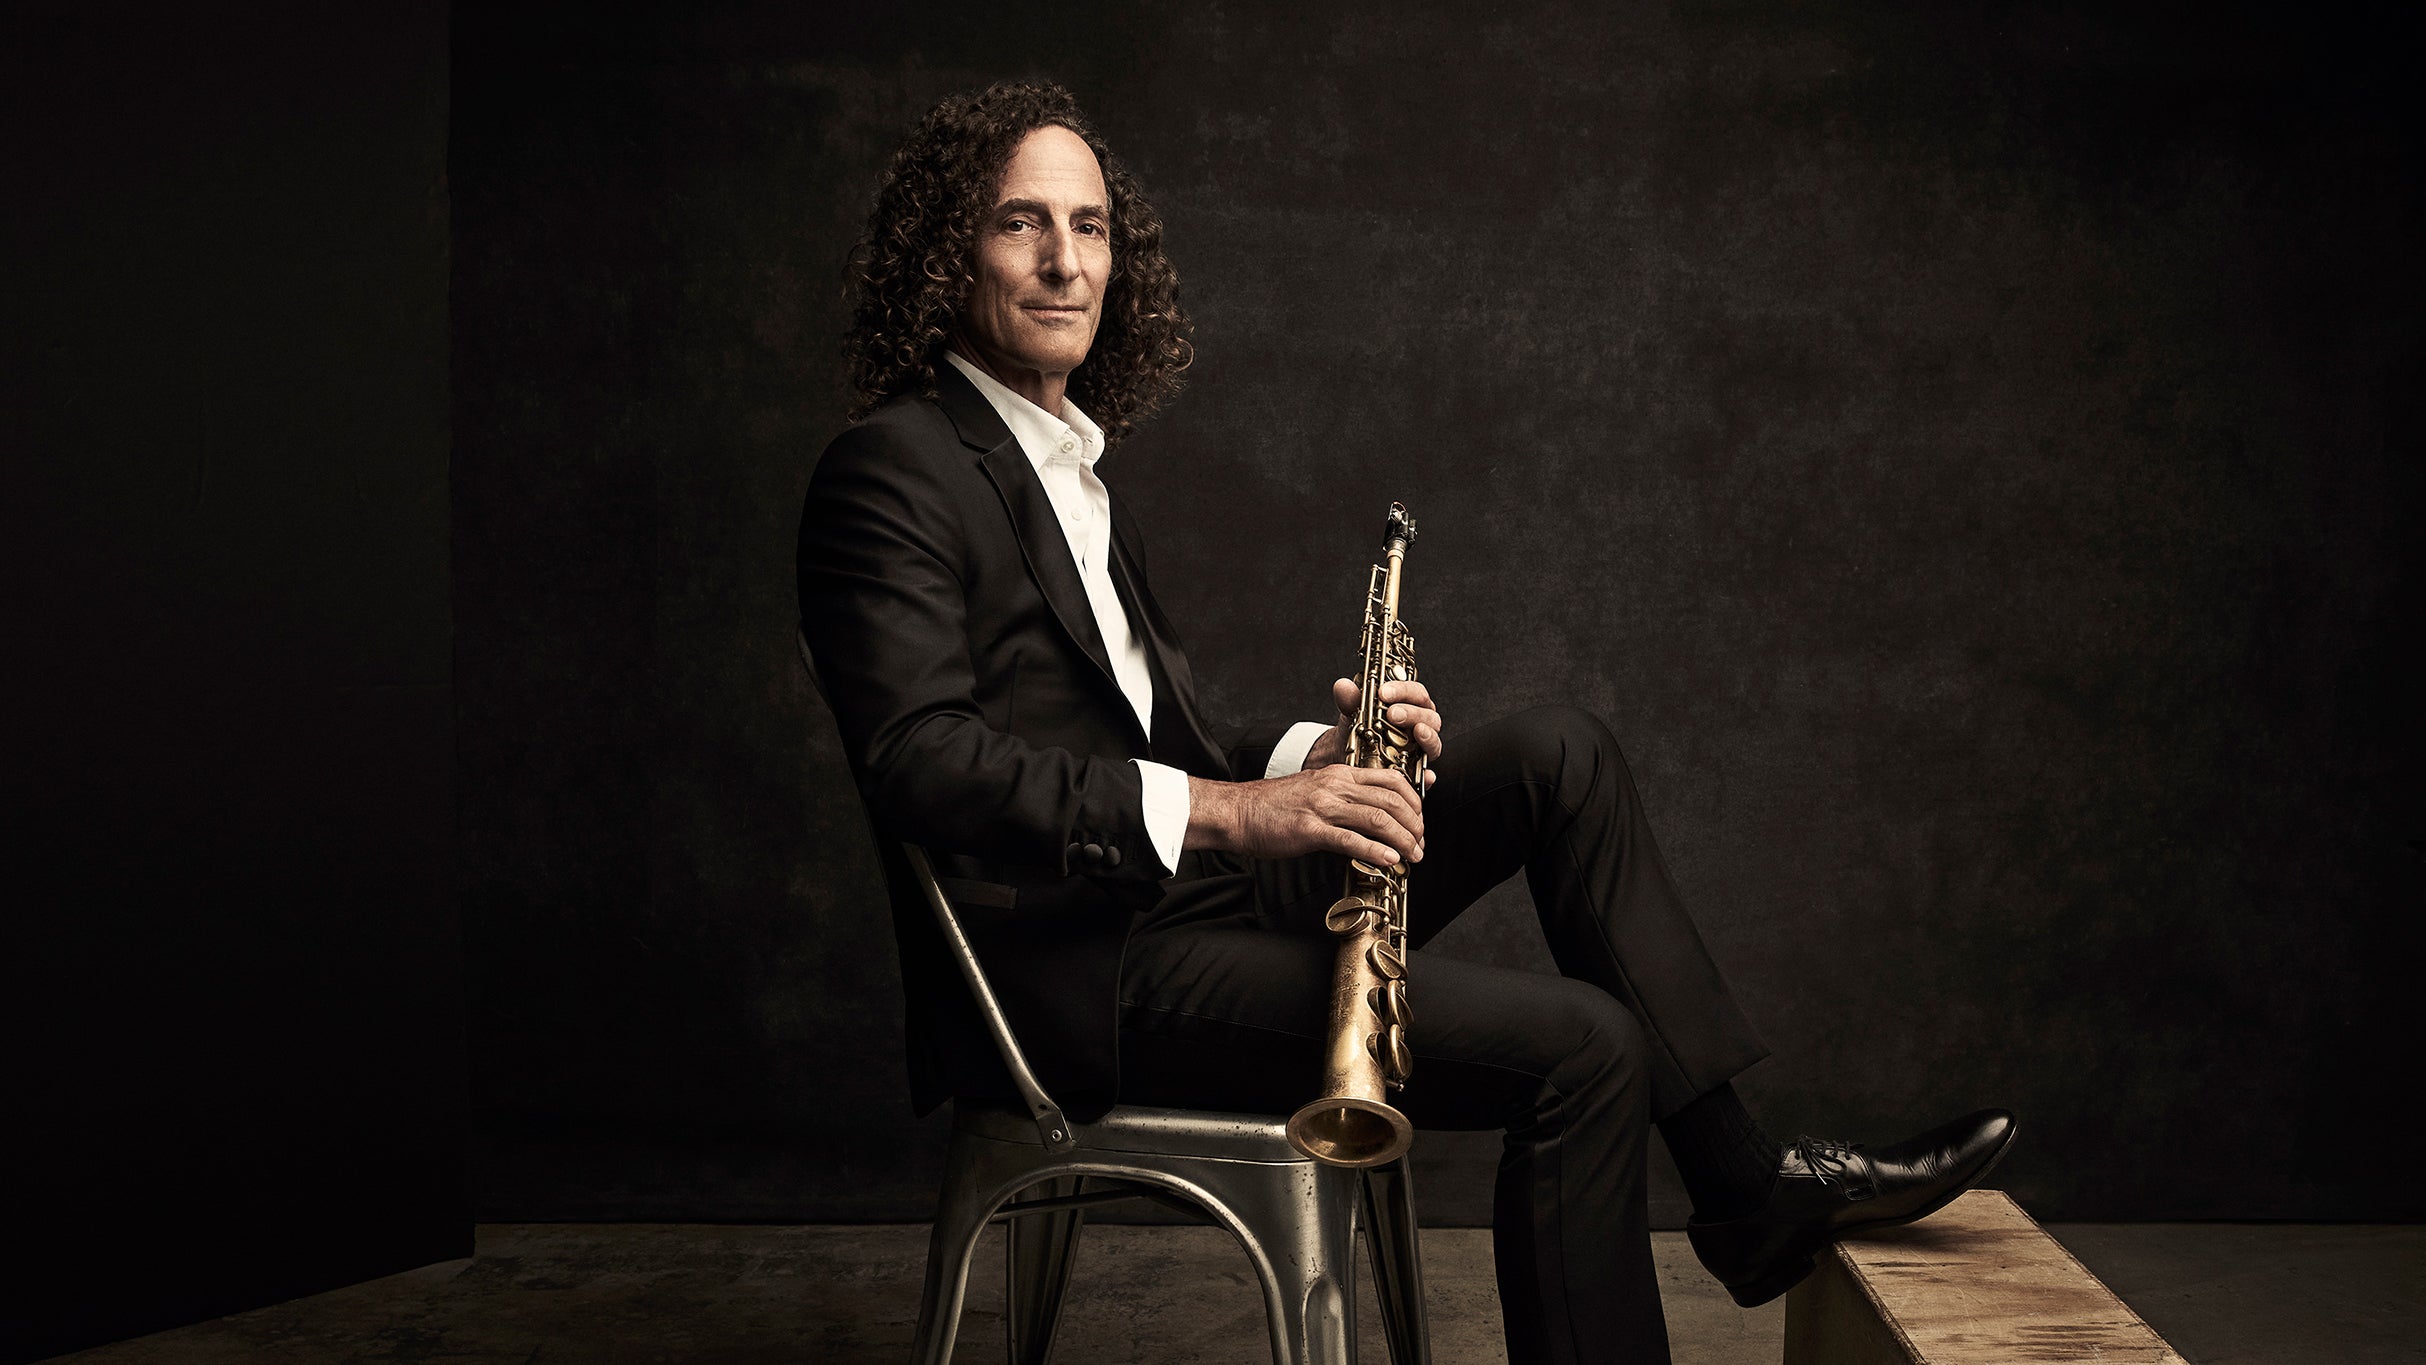 working presale password to Kenny G presale tickets in Ft Lauderdale at Lillian S. Wells Hall at The Parker